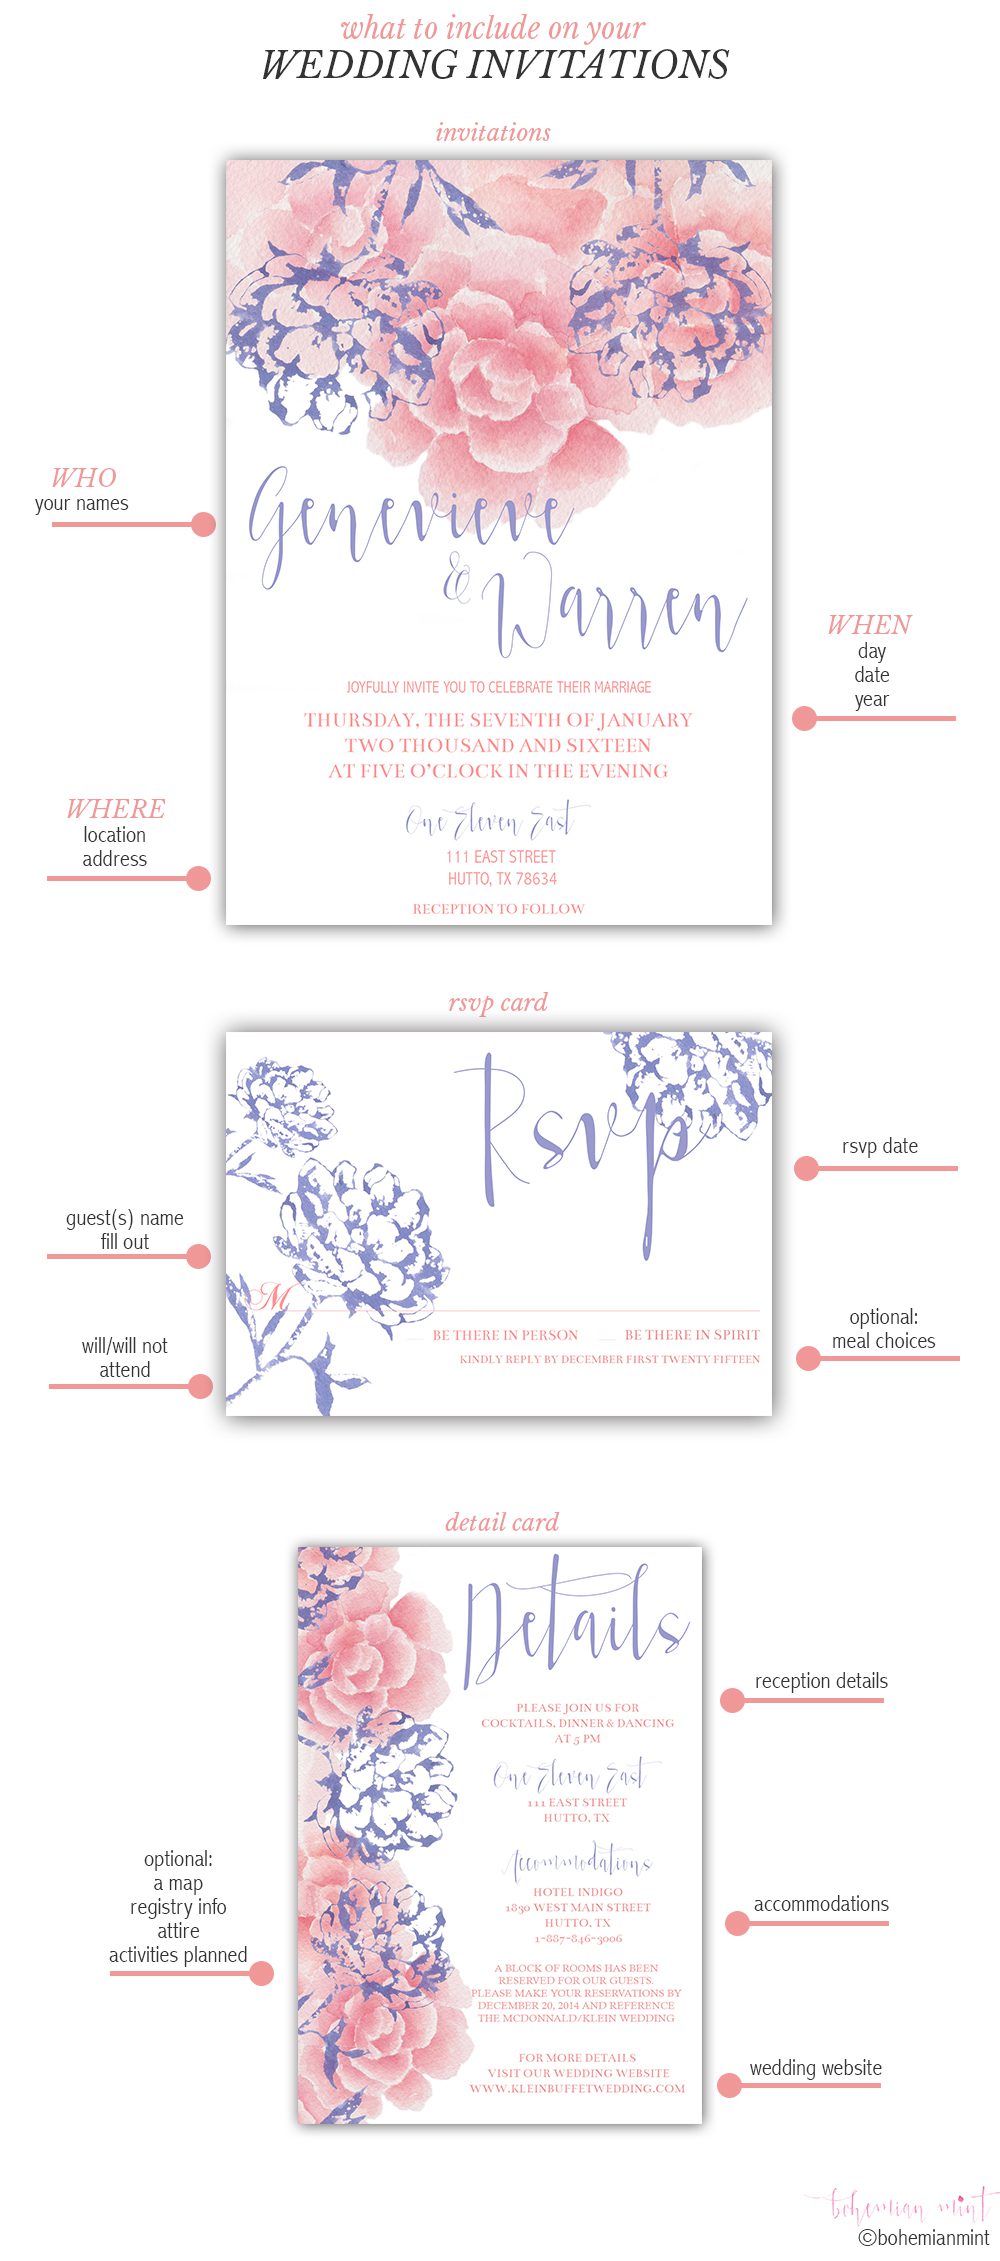 what to include on your wedding invitations-watercolor-invitations by bohemian mint-guide